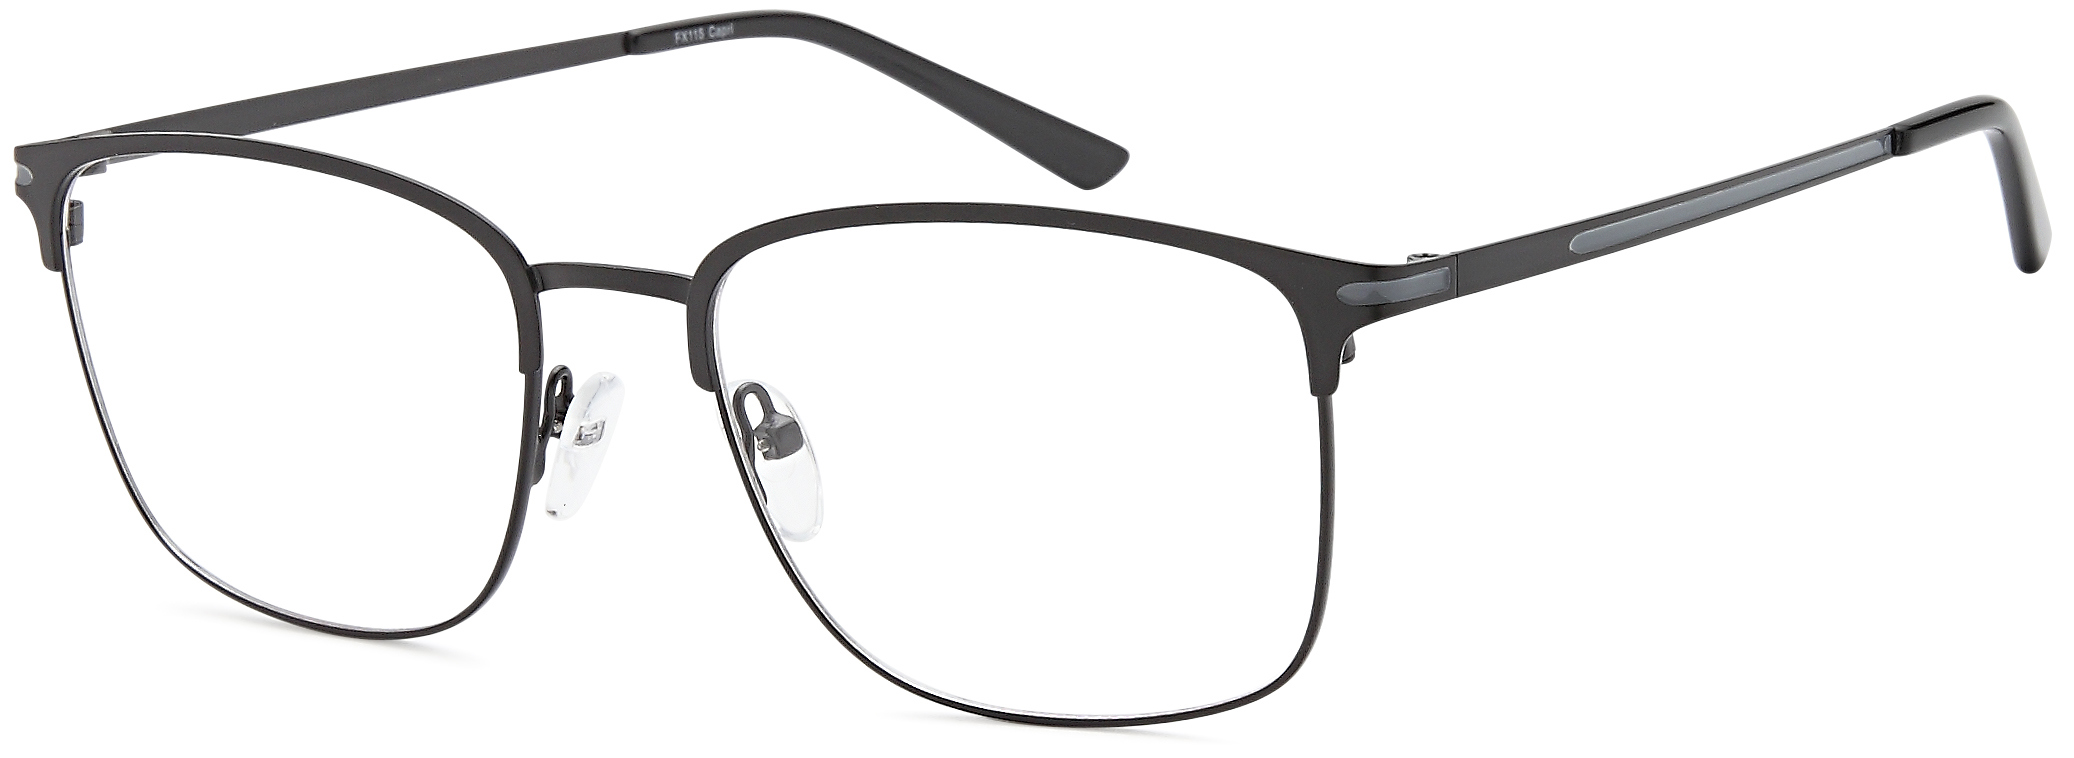 Picture of Flexure Eyeglasses FX115